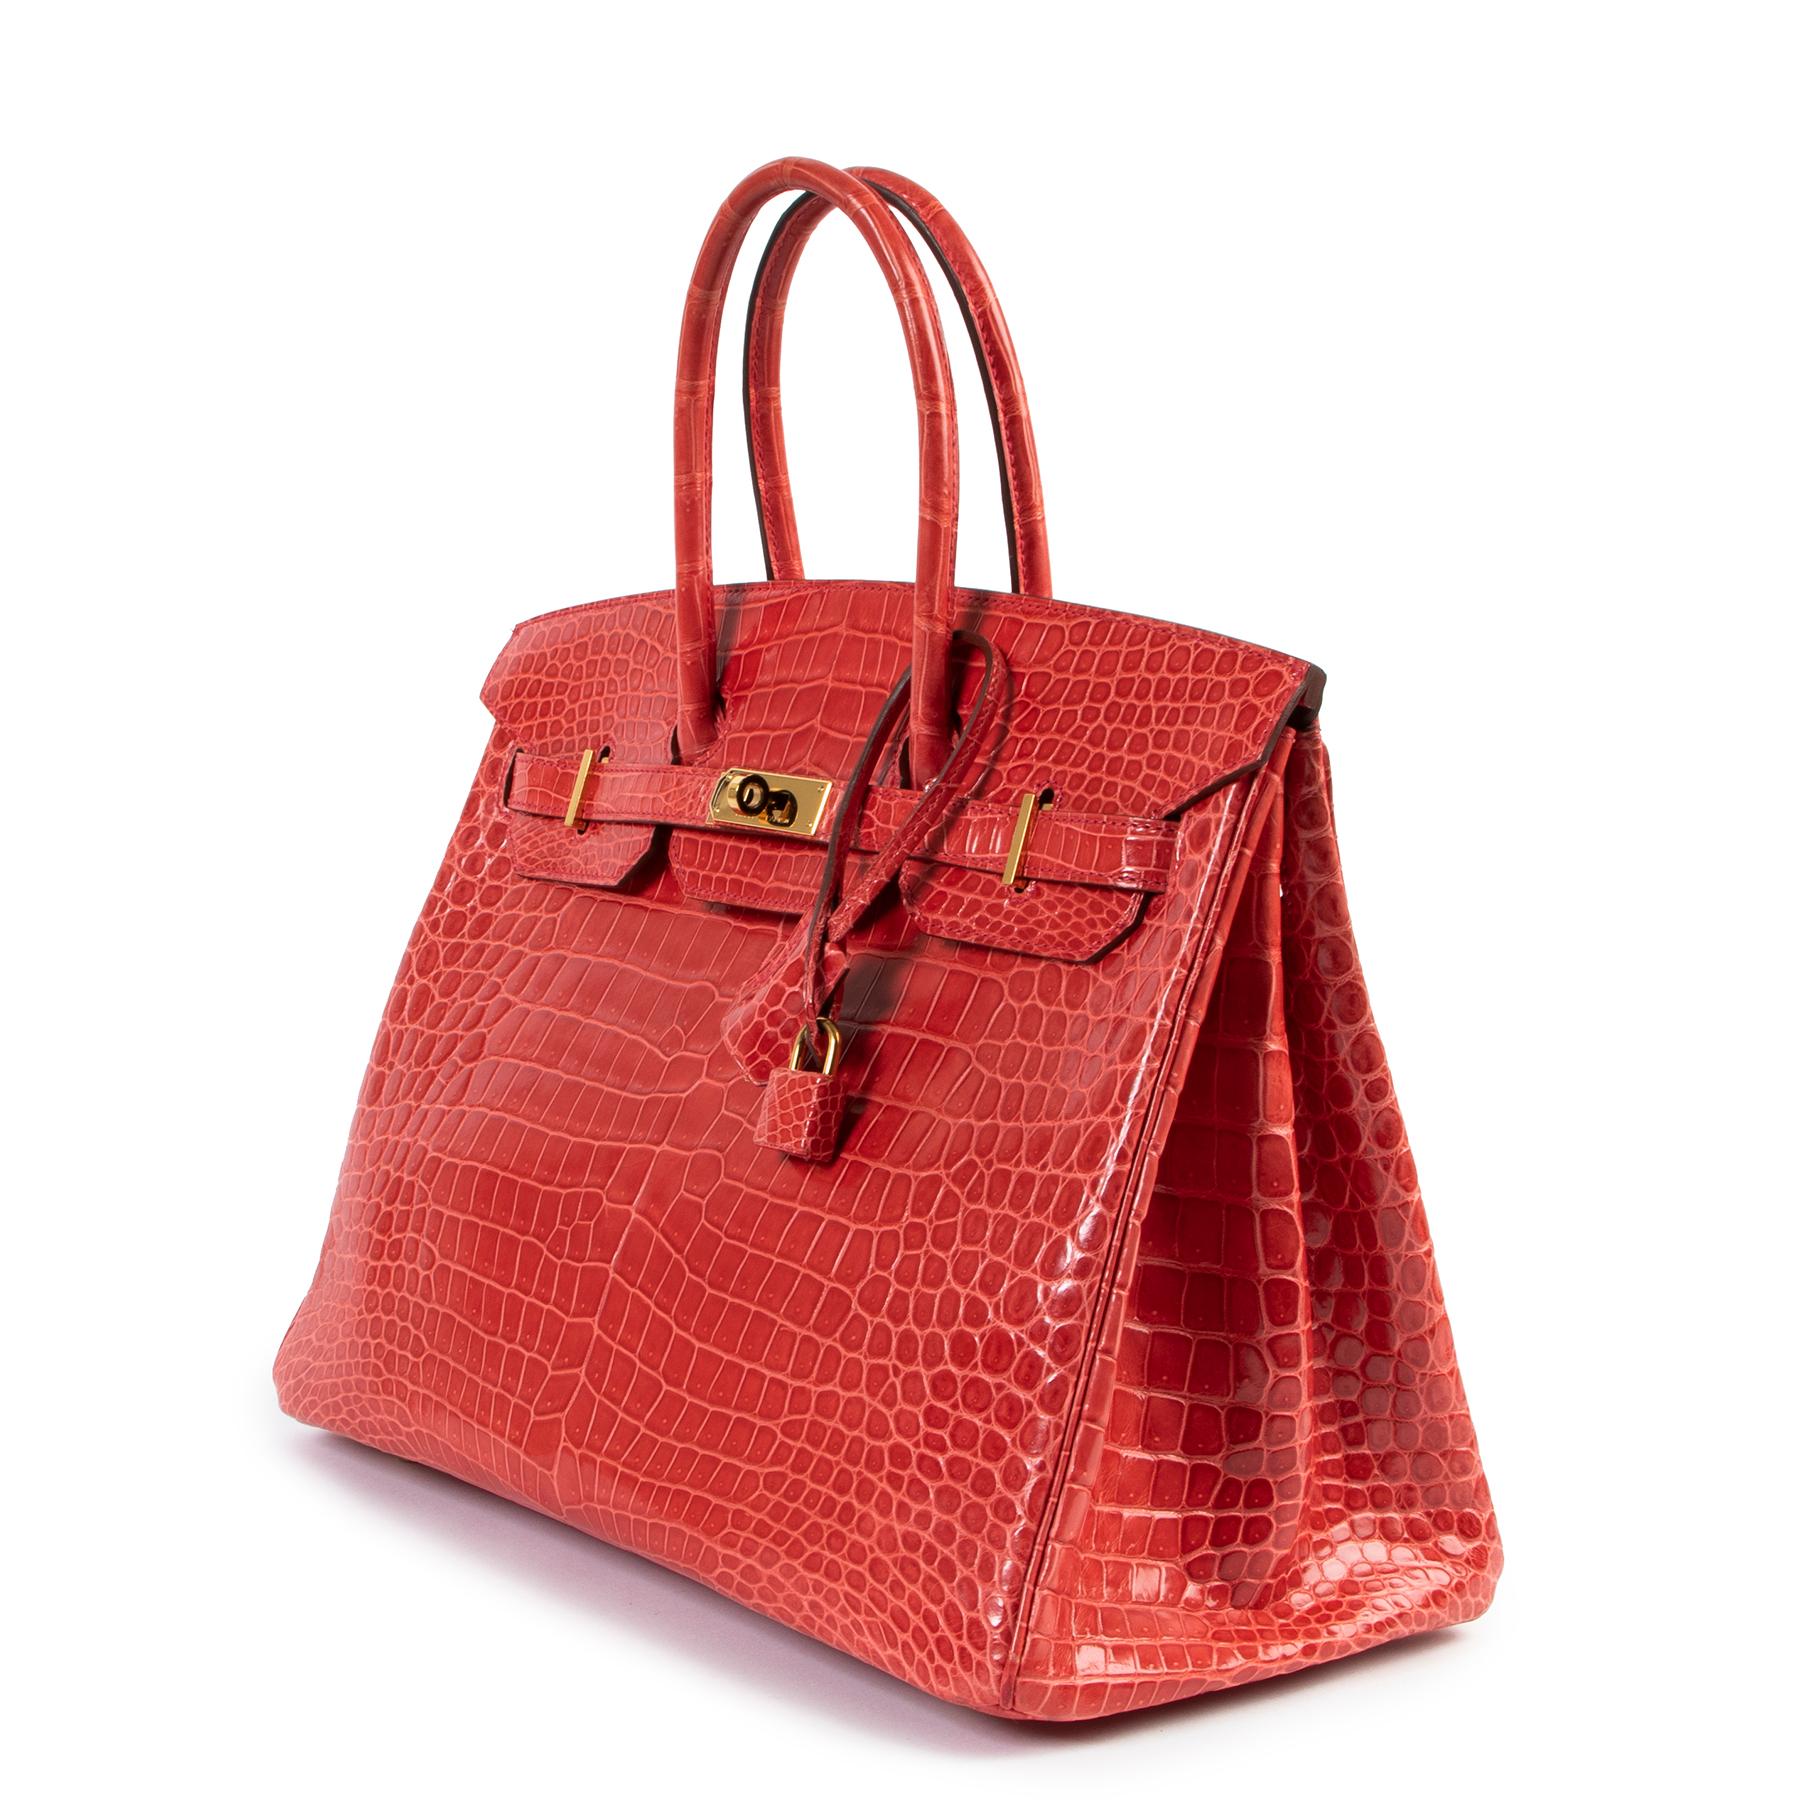 Hermès Birkin 35 Bougainvillier Crocodile Porosus GHW

This rare Birkin comes in a beautiful tone of rouge bougainvillier which is a wonderful mix of hot red, orange and pink. This exotic beauty has gold toned hardware and is a true collectors